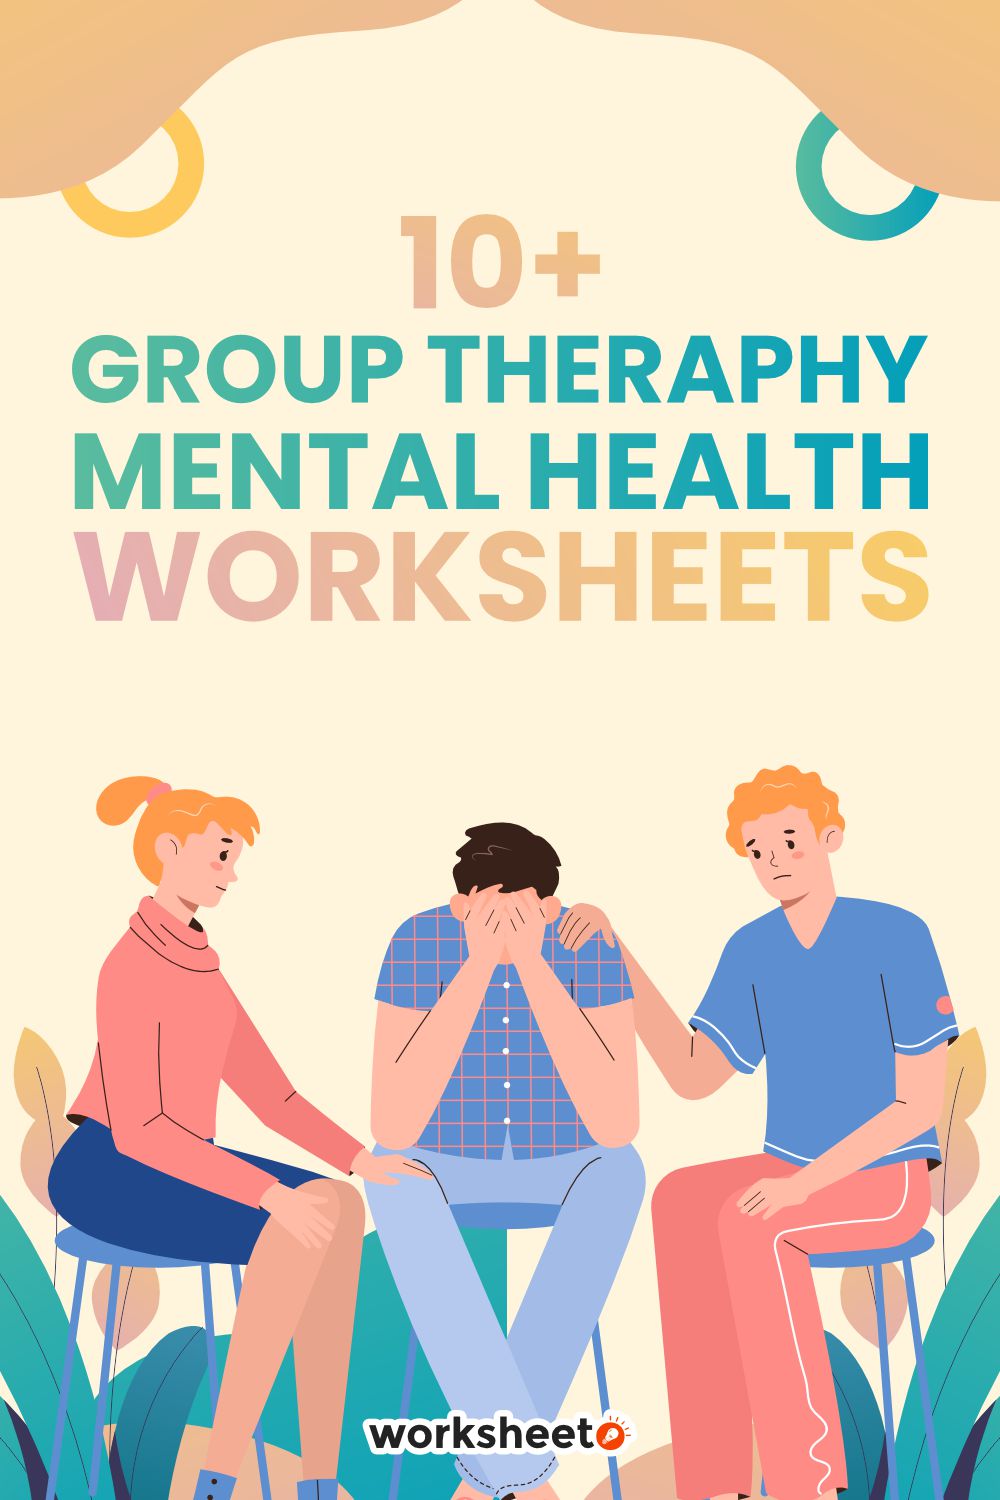 18 Images of Group Therapy Mental Health Worksheets